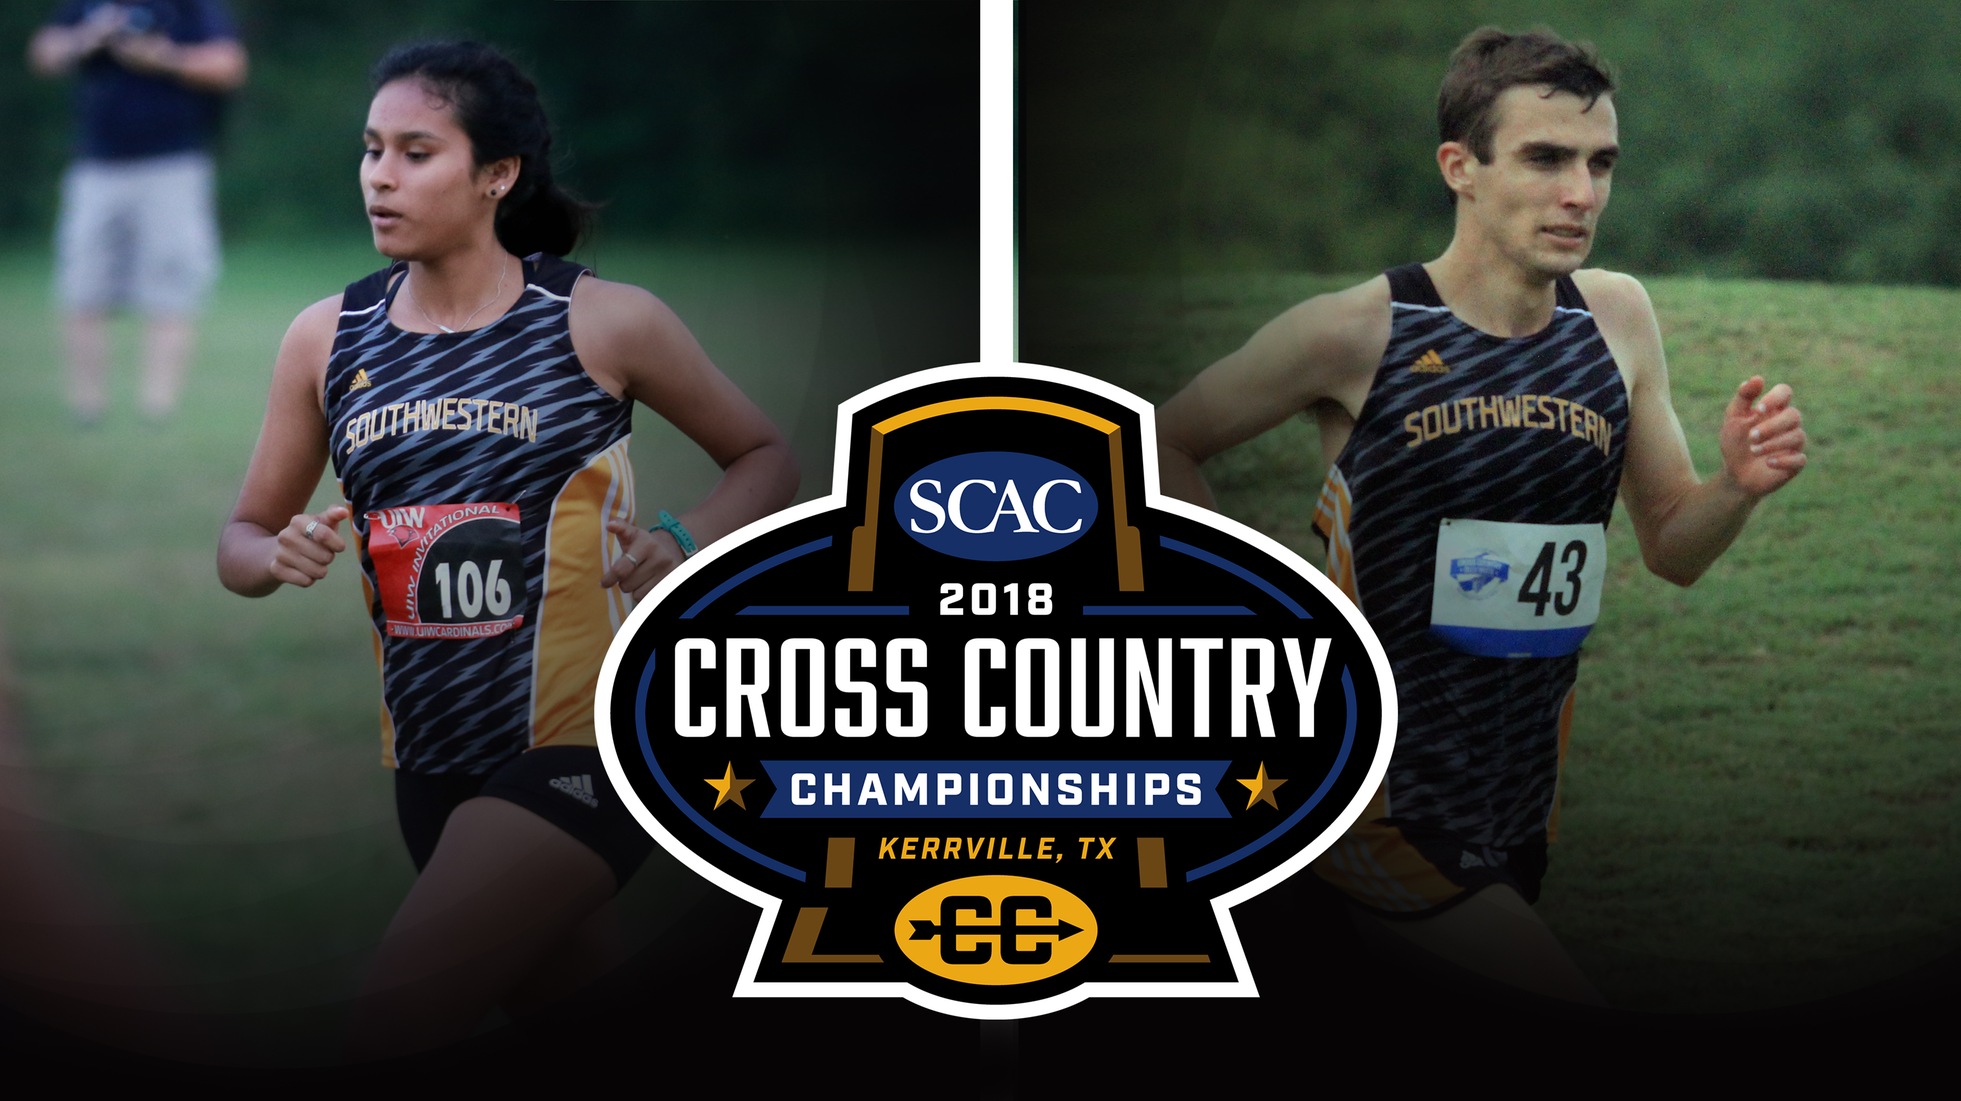 Through Stormy Weeks, Cross Country Remains Steady Heading Into SCAC Championships